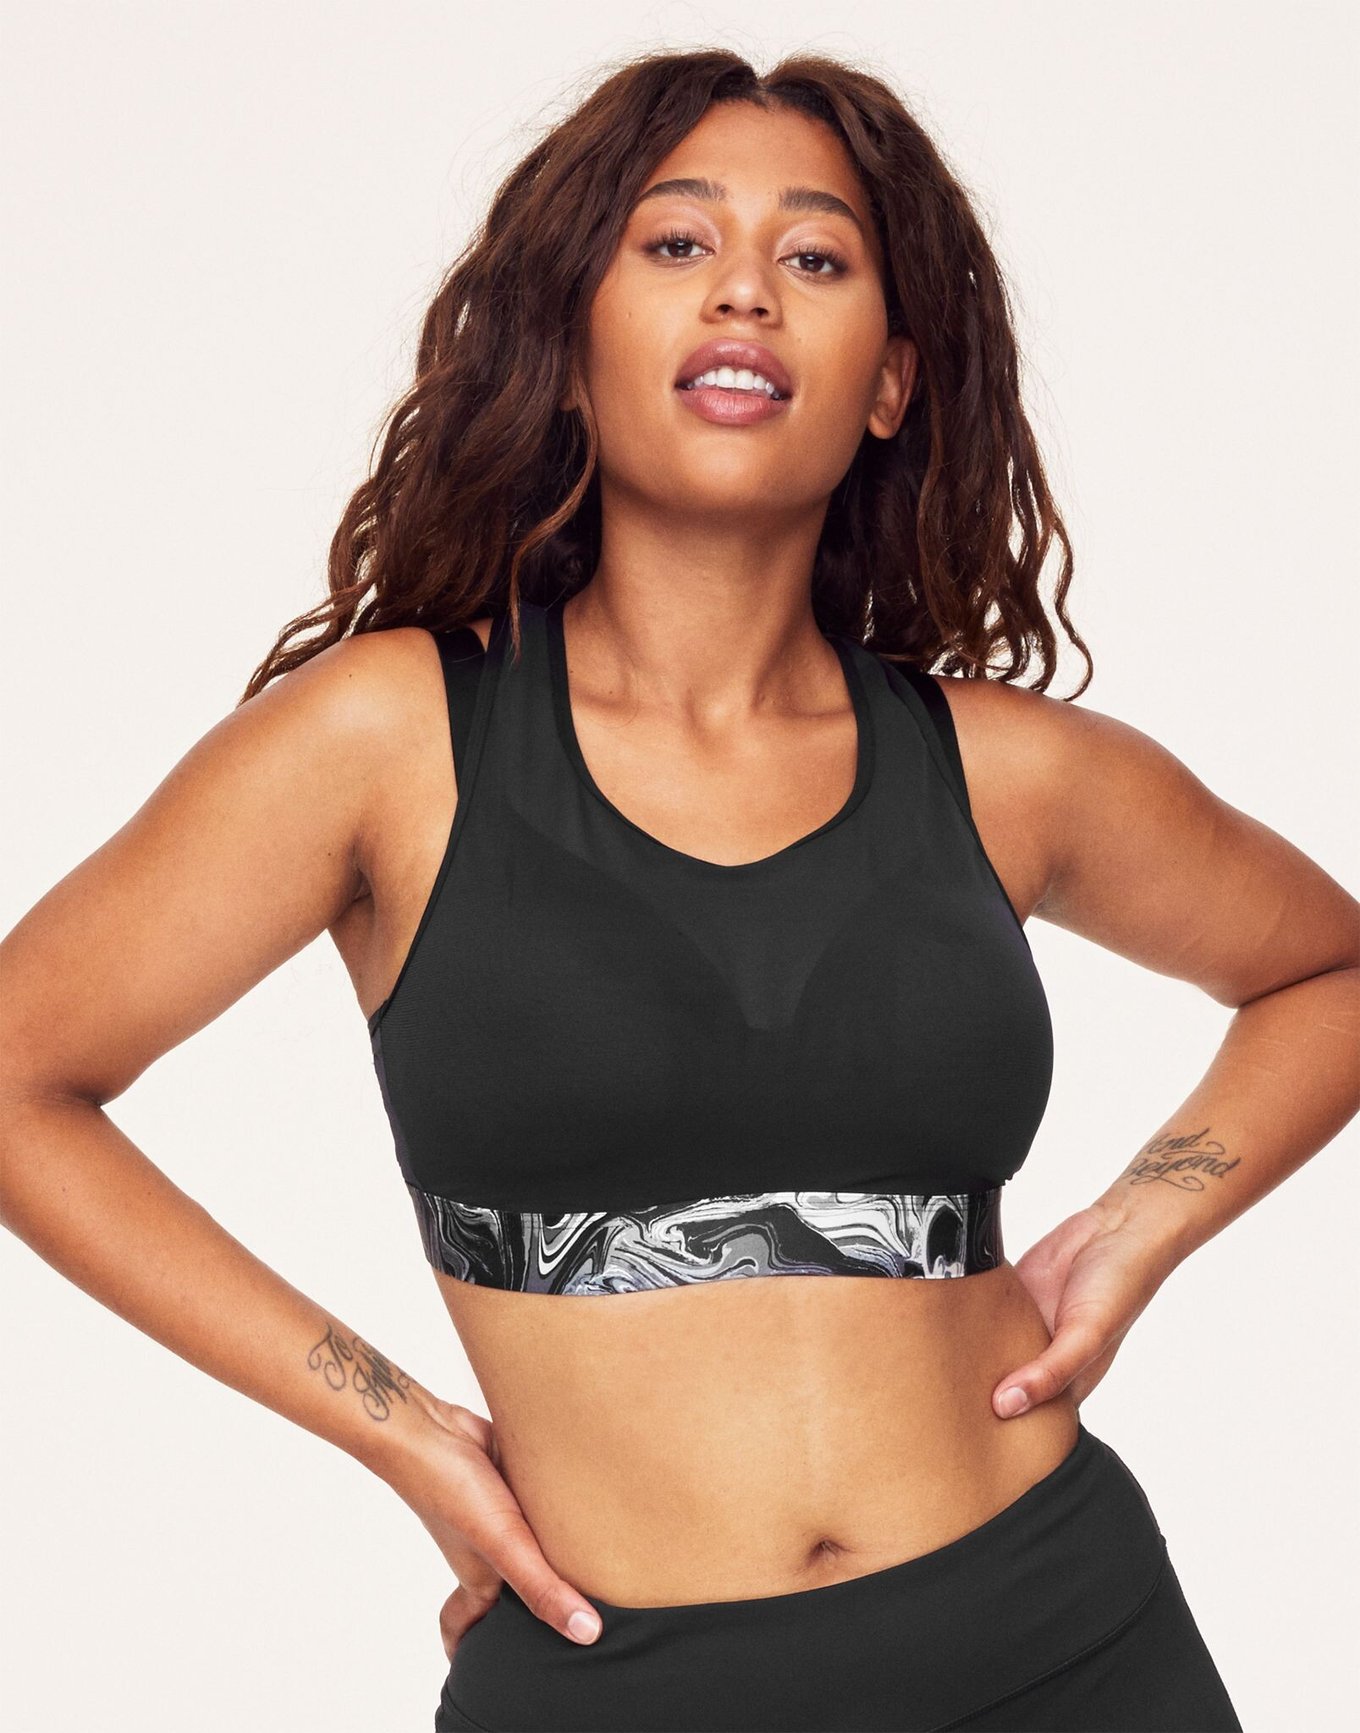 Plus Size Women'S Front Closure 3 Row 6 Hook Sports Bra Without